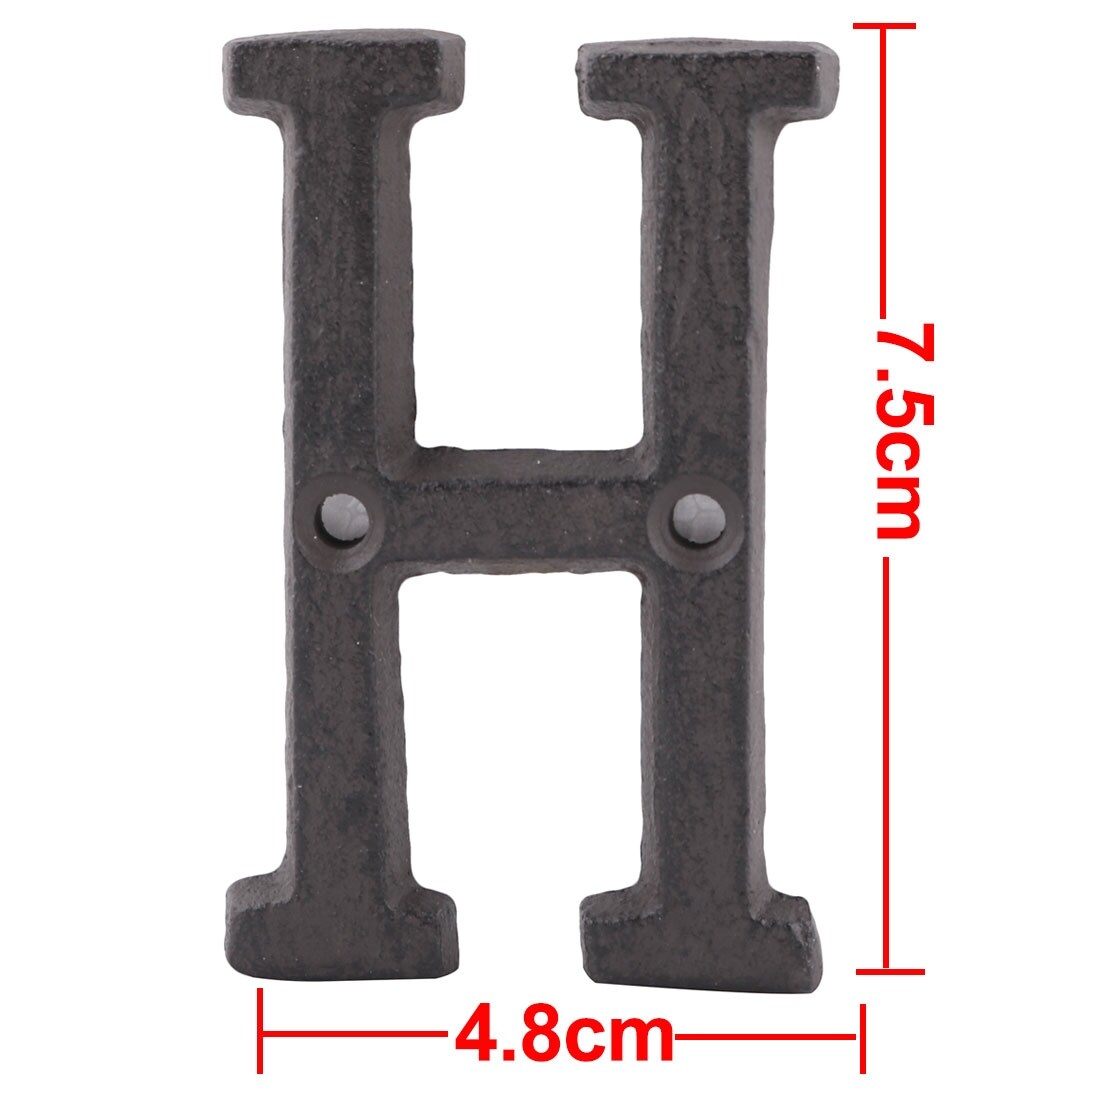 Iron, Decorative Letters Decorative Objects - Bed Bath & Beyond